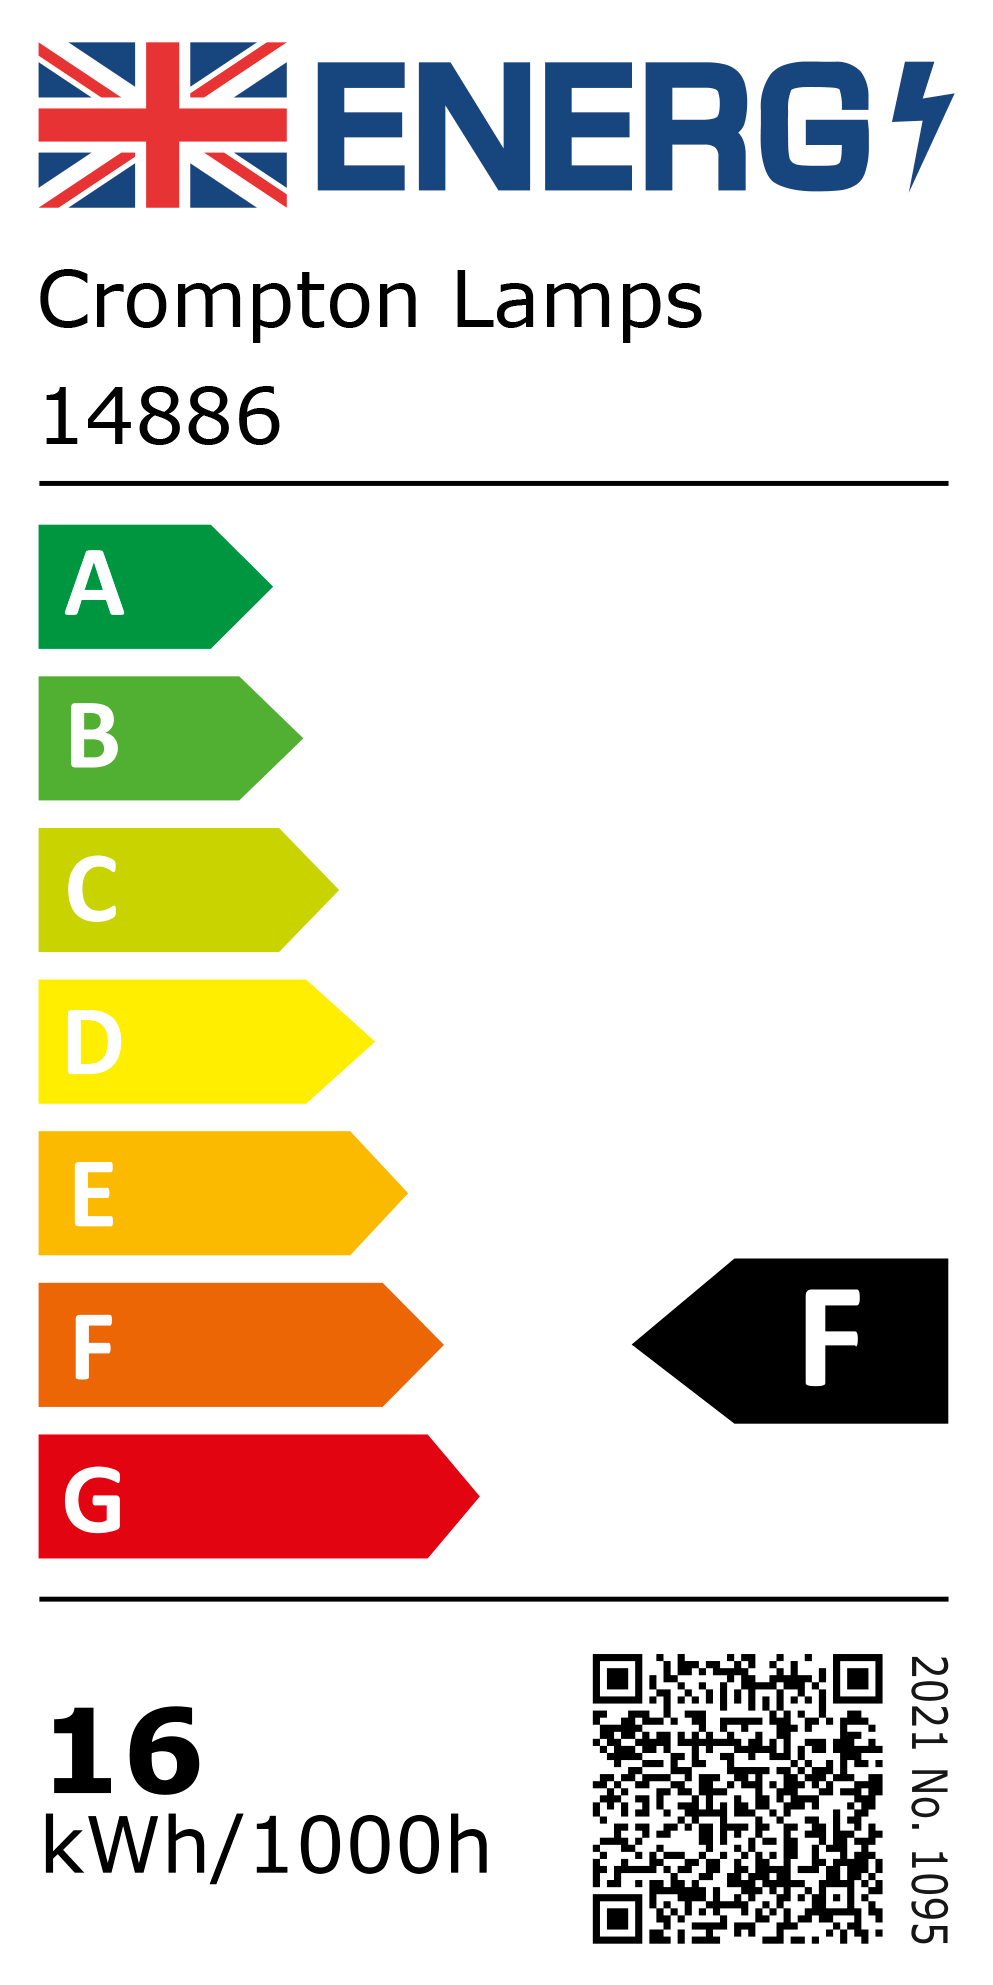 New 2021 Energy Rating Label: Stock Code 14886